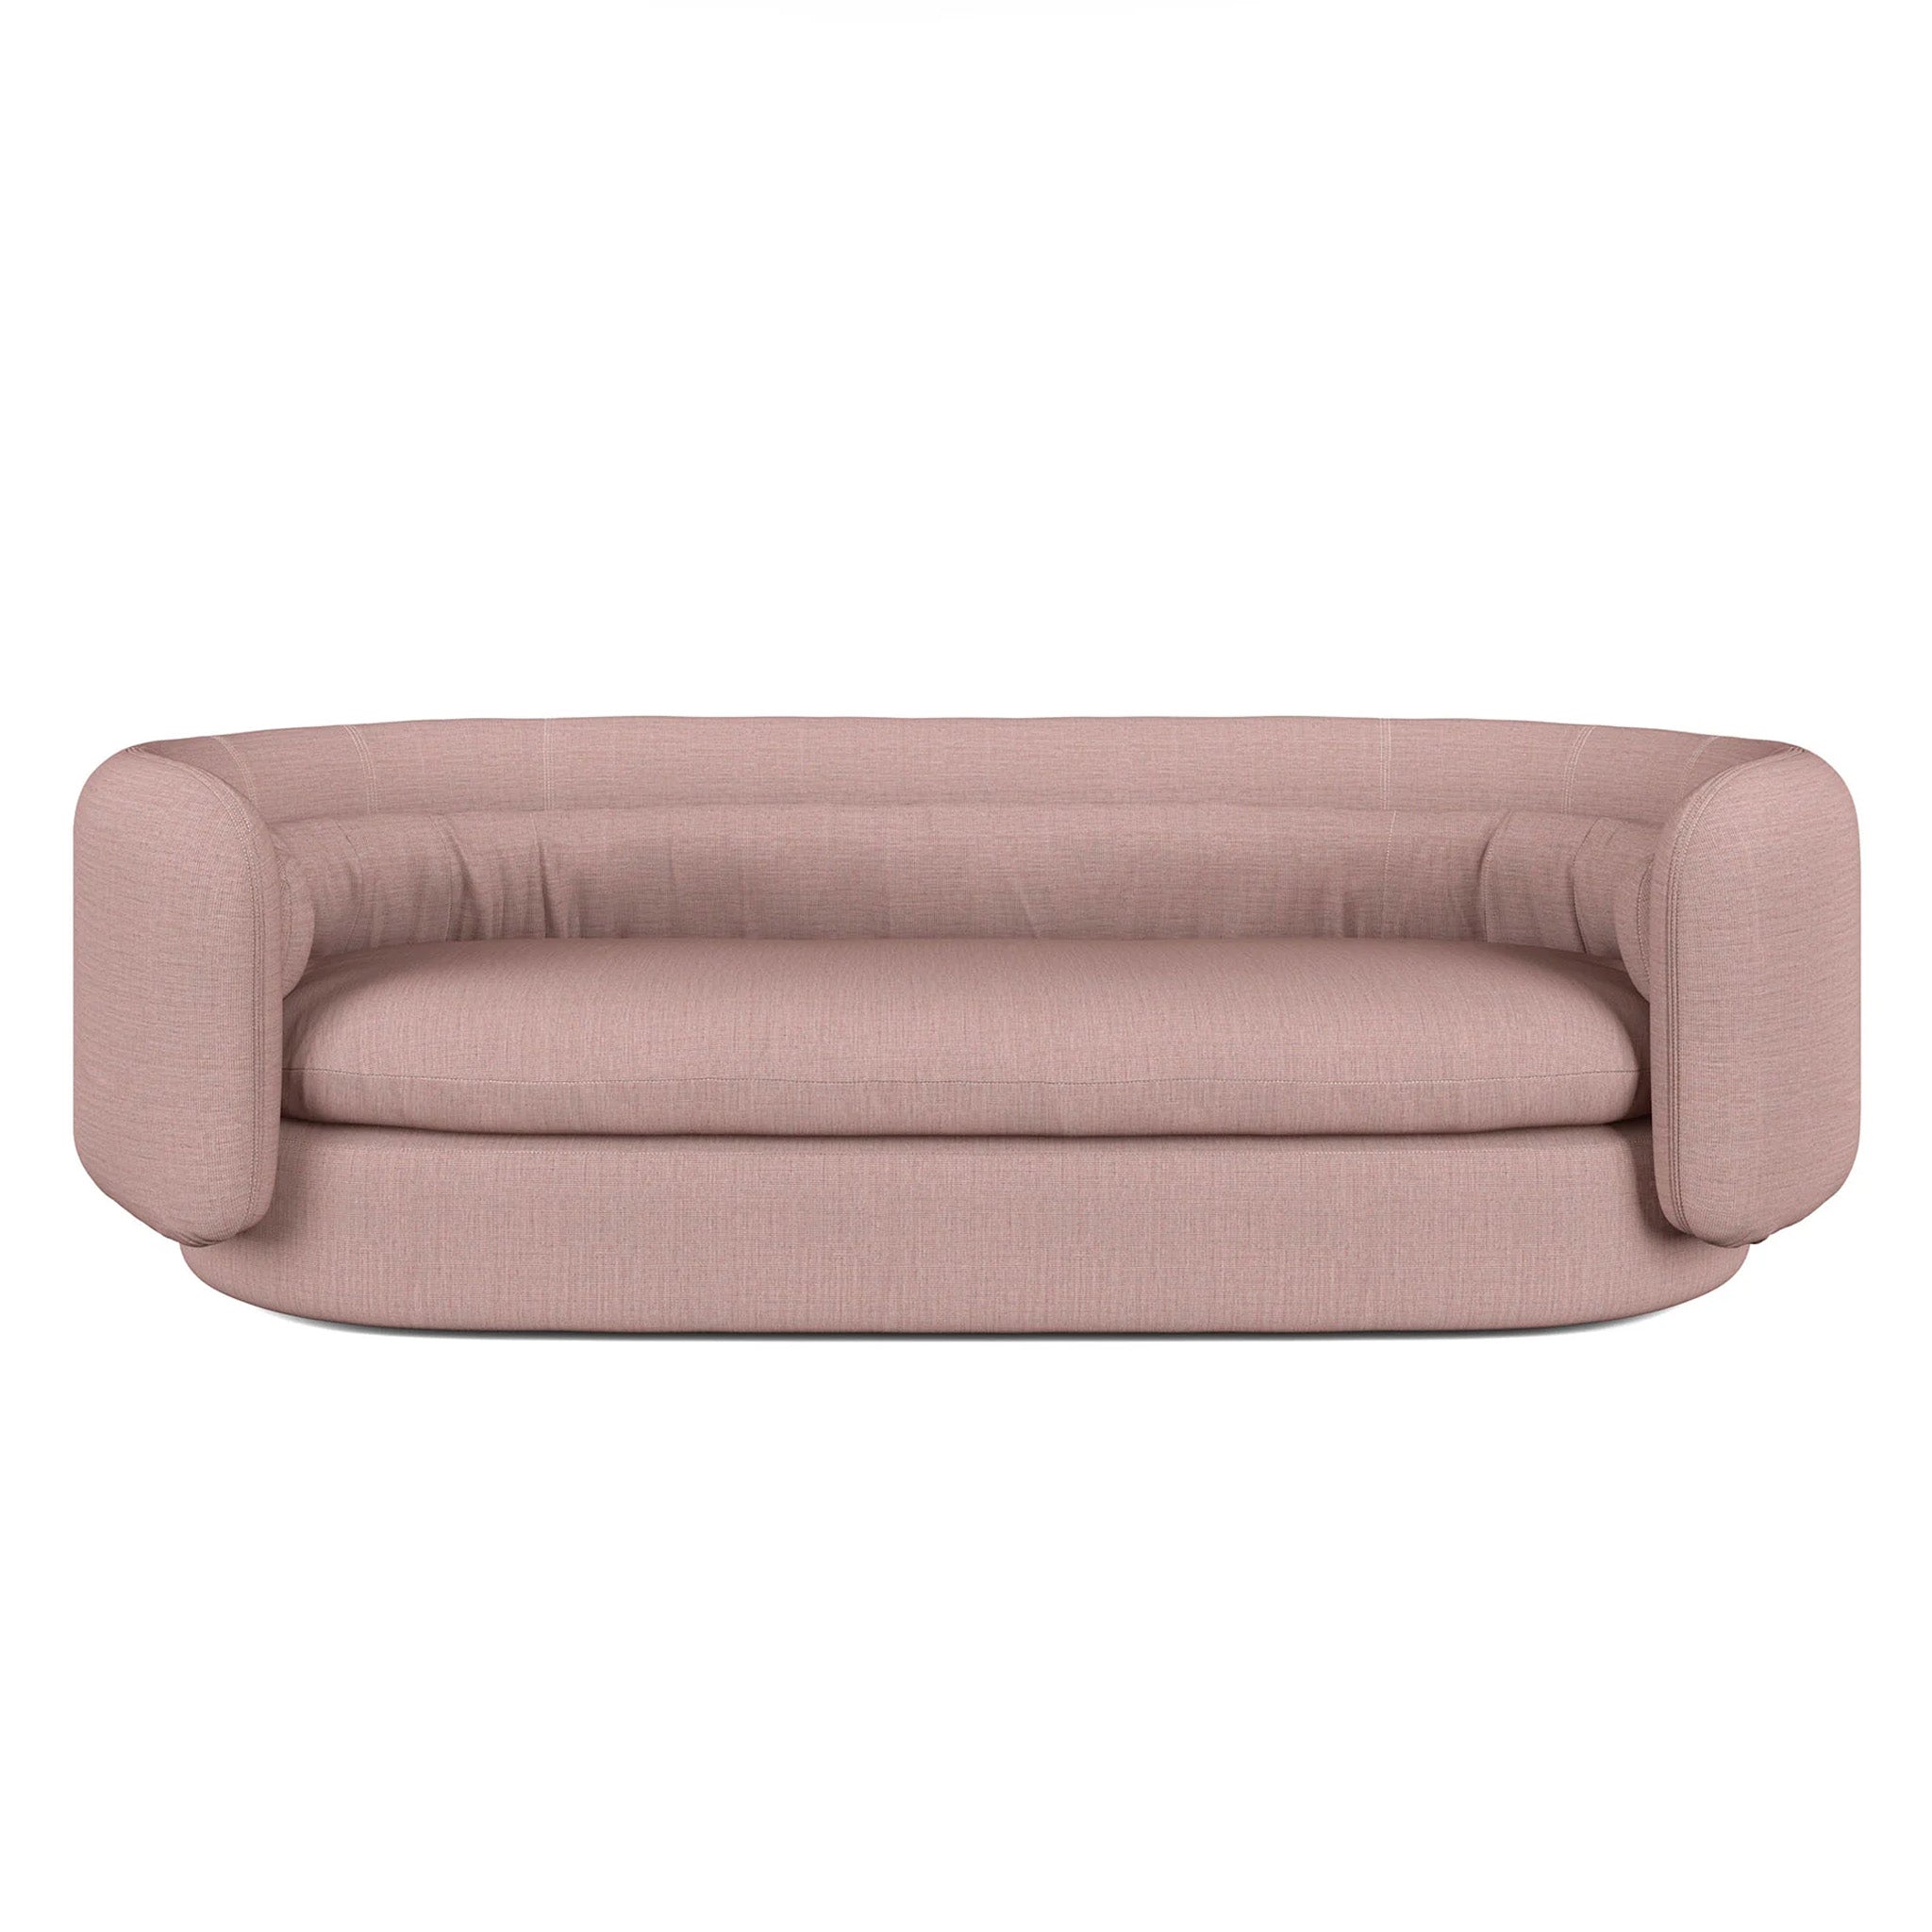 Group Three Seat Sofa by SCP